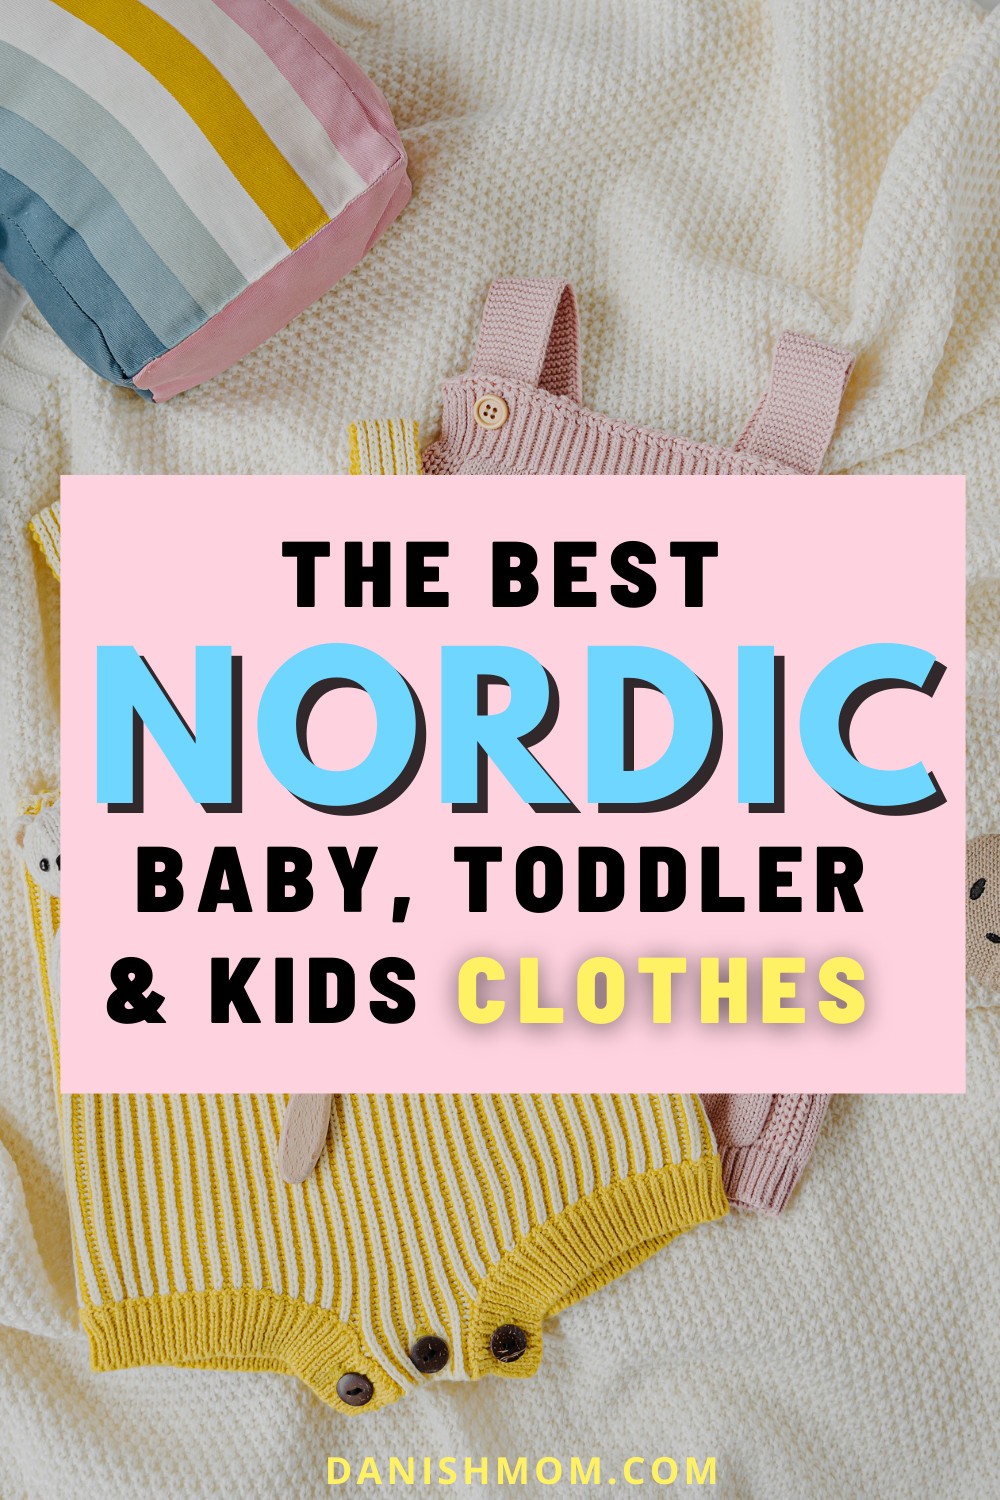 Discover the best Nordic kids clothes in sustainable and functional quality. These Scandinavian kidswear brands are available for boys and girls in sizes that range from newborn, baby, toddler and tween to teens. Best Danish parenting. Baby tips #scandinavian #ecofriendly #sustainable #clothing #kids #children